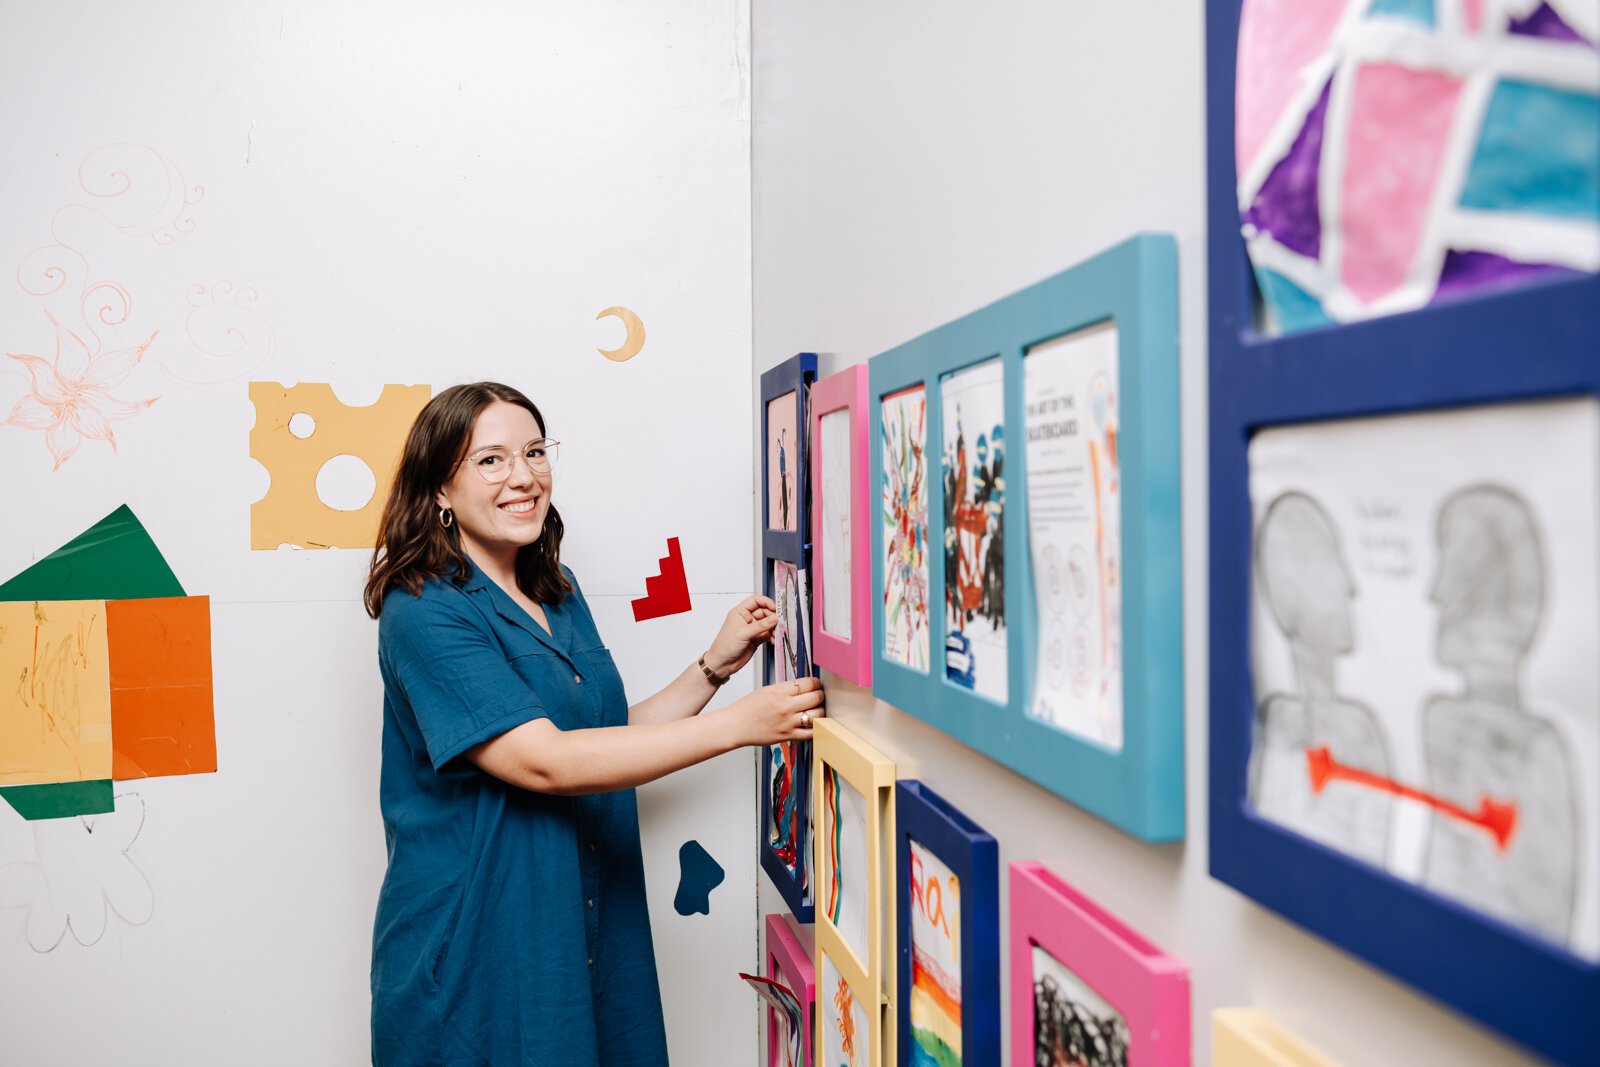 Alyssa Dumire, Director of Education, organizes works that visitors create while visiting The John S. and James L. Knight Learning Center at Fort Wayne Museum of Art.